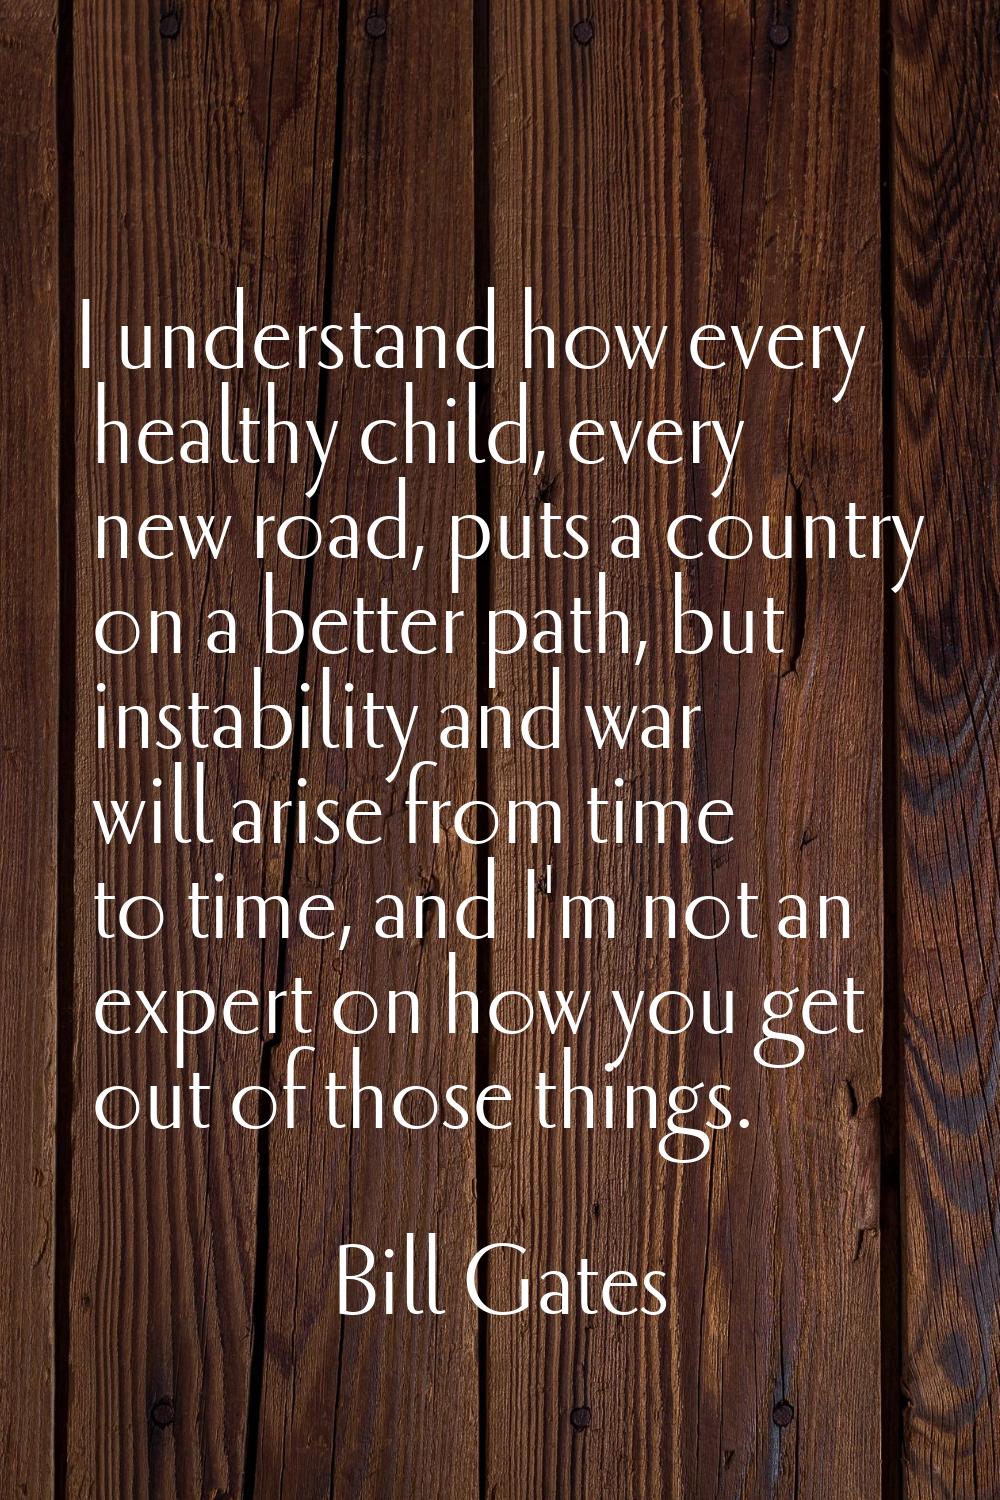 I understand how every healthy child, every new road, puts a country on a better path, but instabil